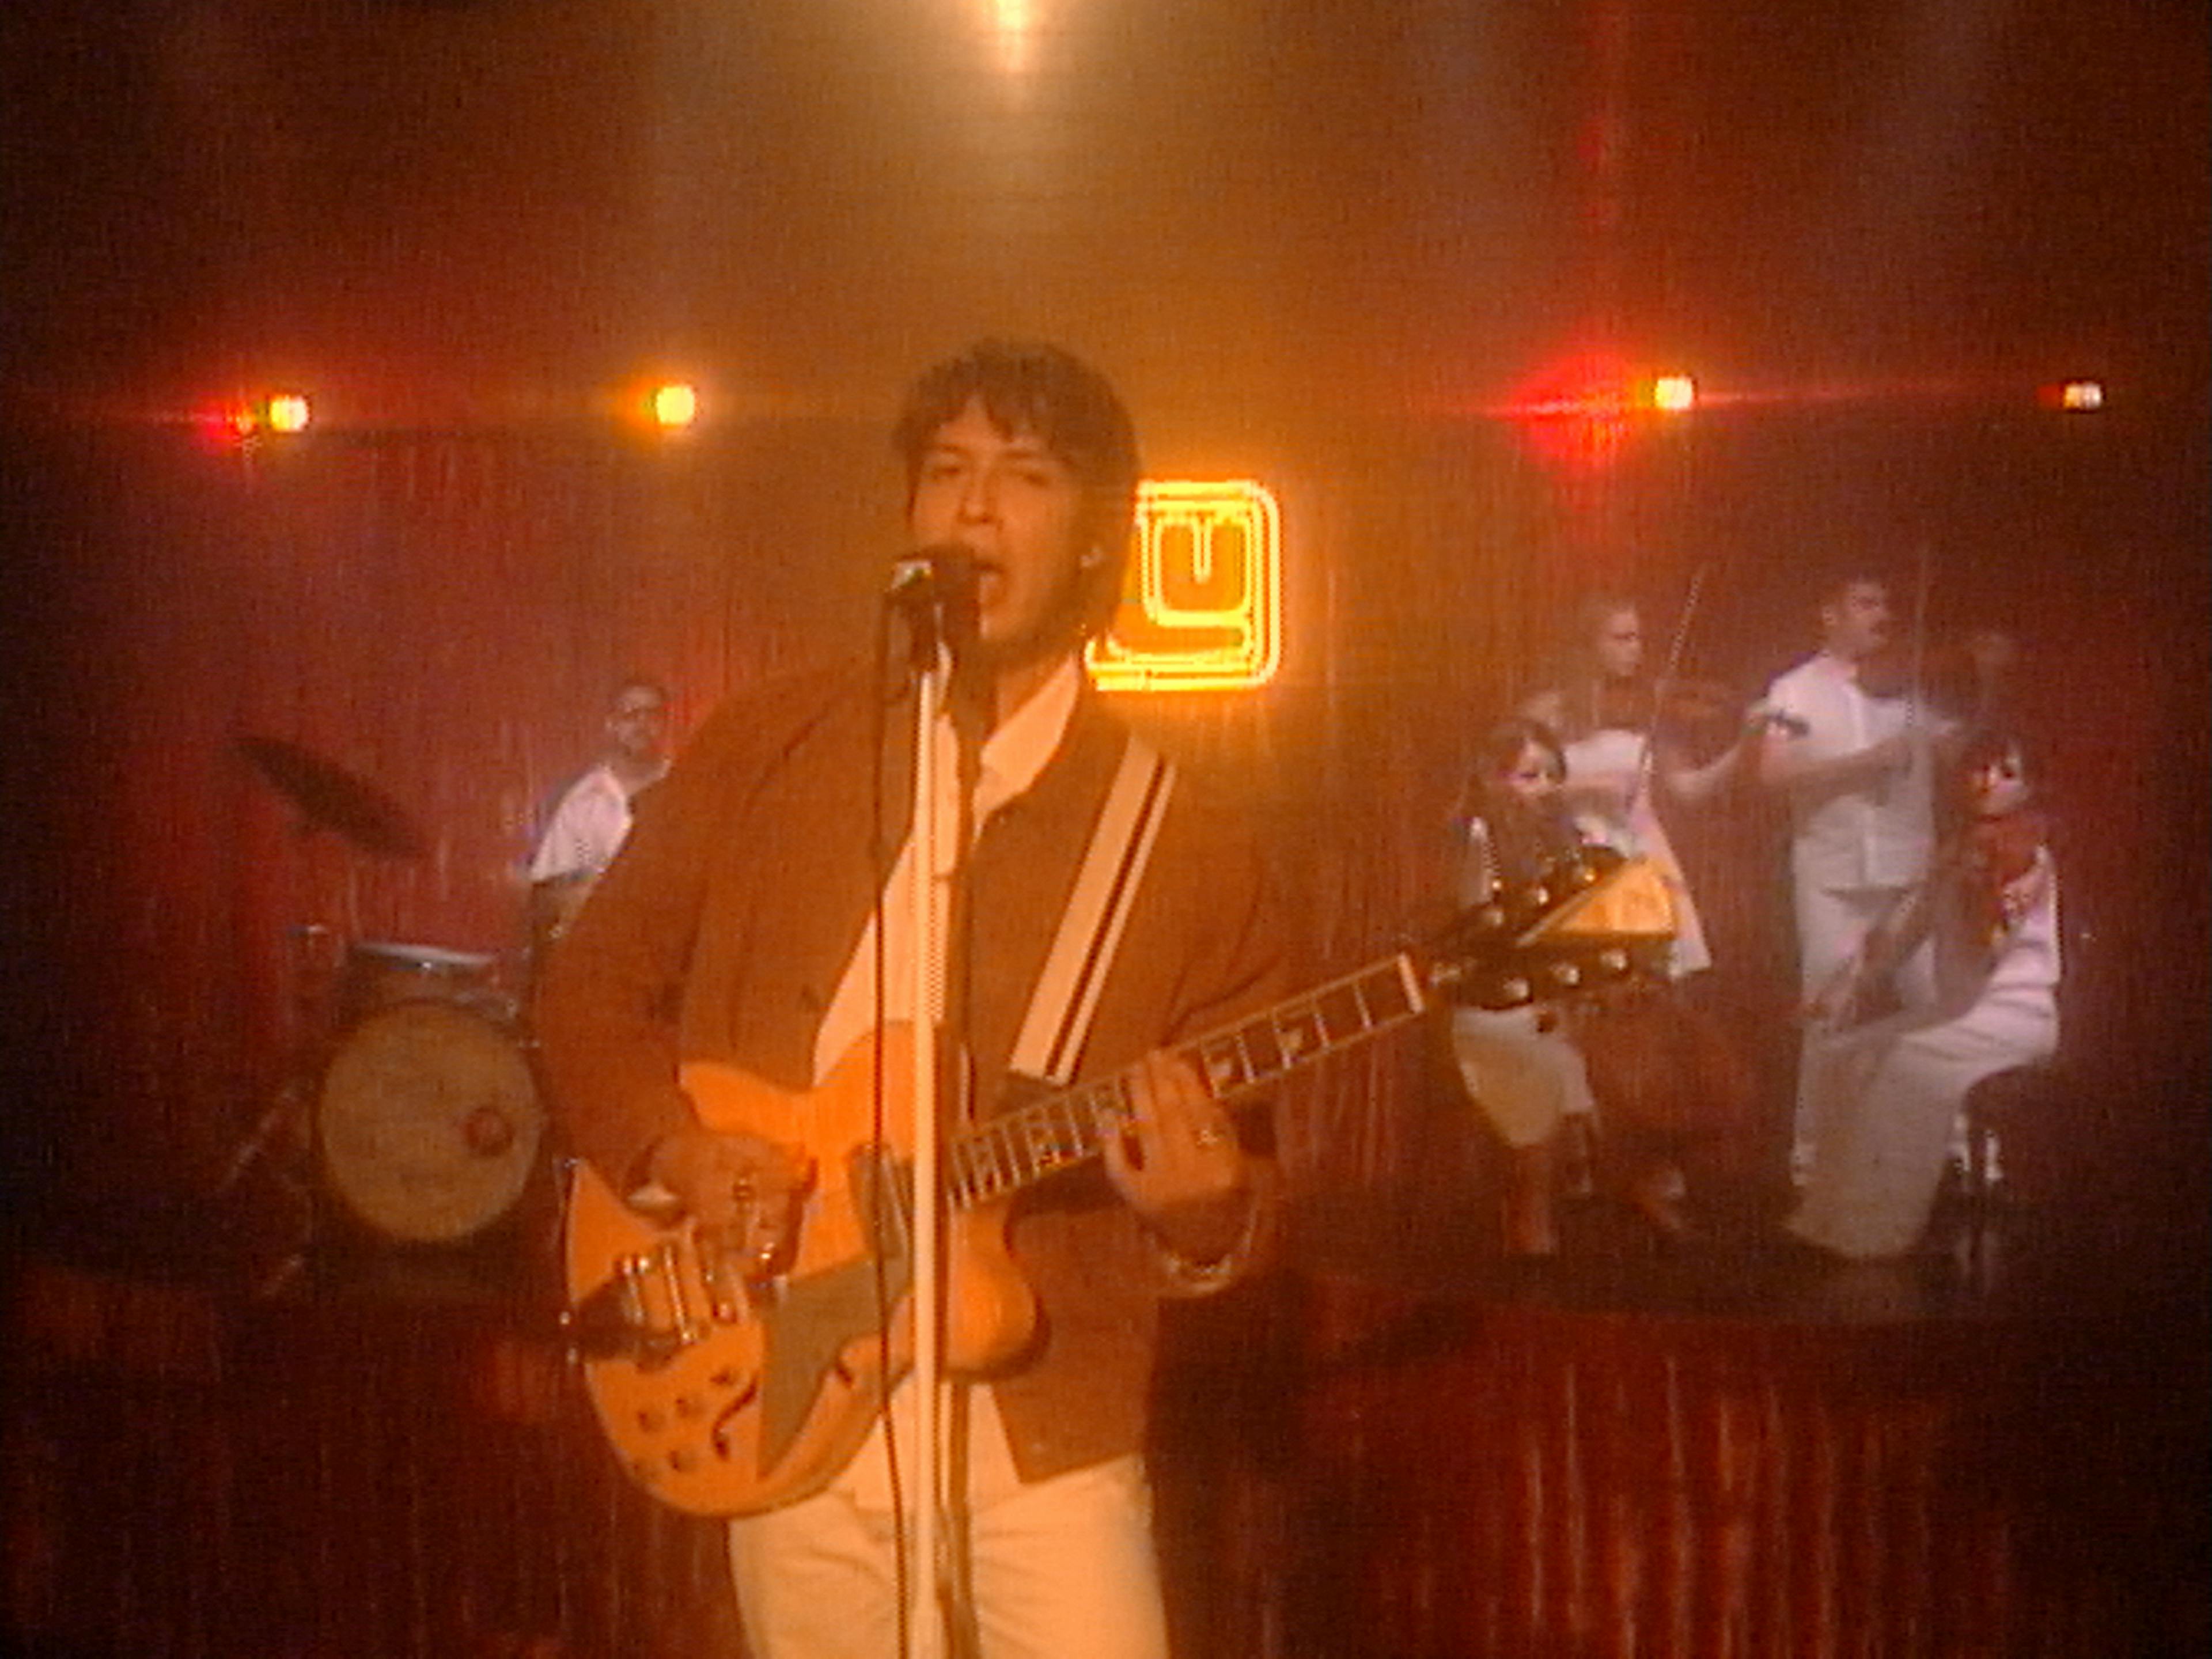 A vibrant scene from Inner Wave's music video 'Fever' features the band performing on stage. The focal point is a male singer with dark curly hair, holding a sunburst electric guitar, and singing into a microphone. He is wearing a brown jacket over a white shirt with a dark stripe. Behind him, the stage is bathed in a warm, reddish glow with a vintage feel.